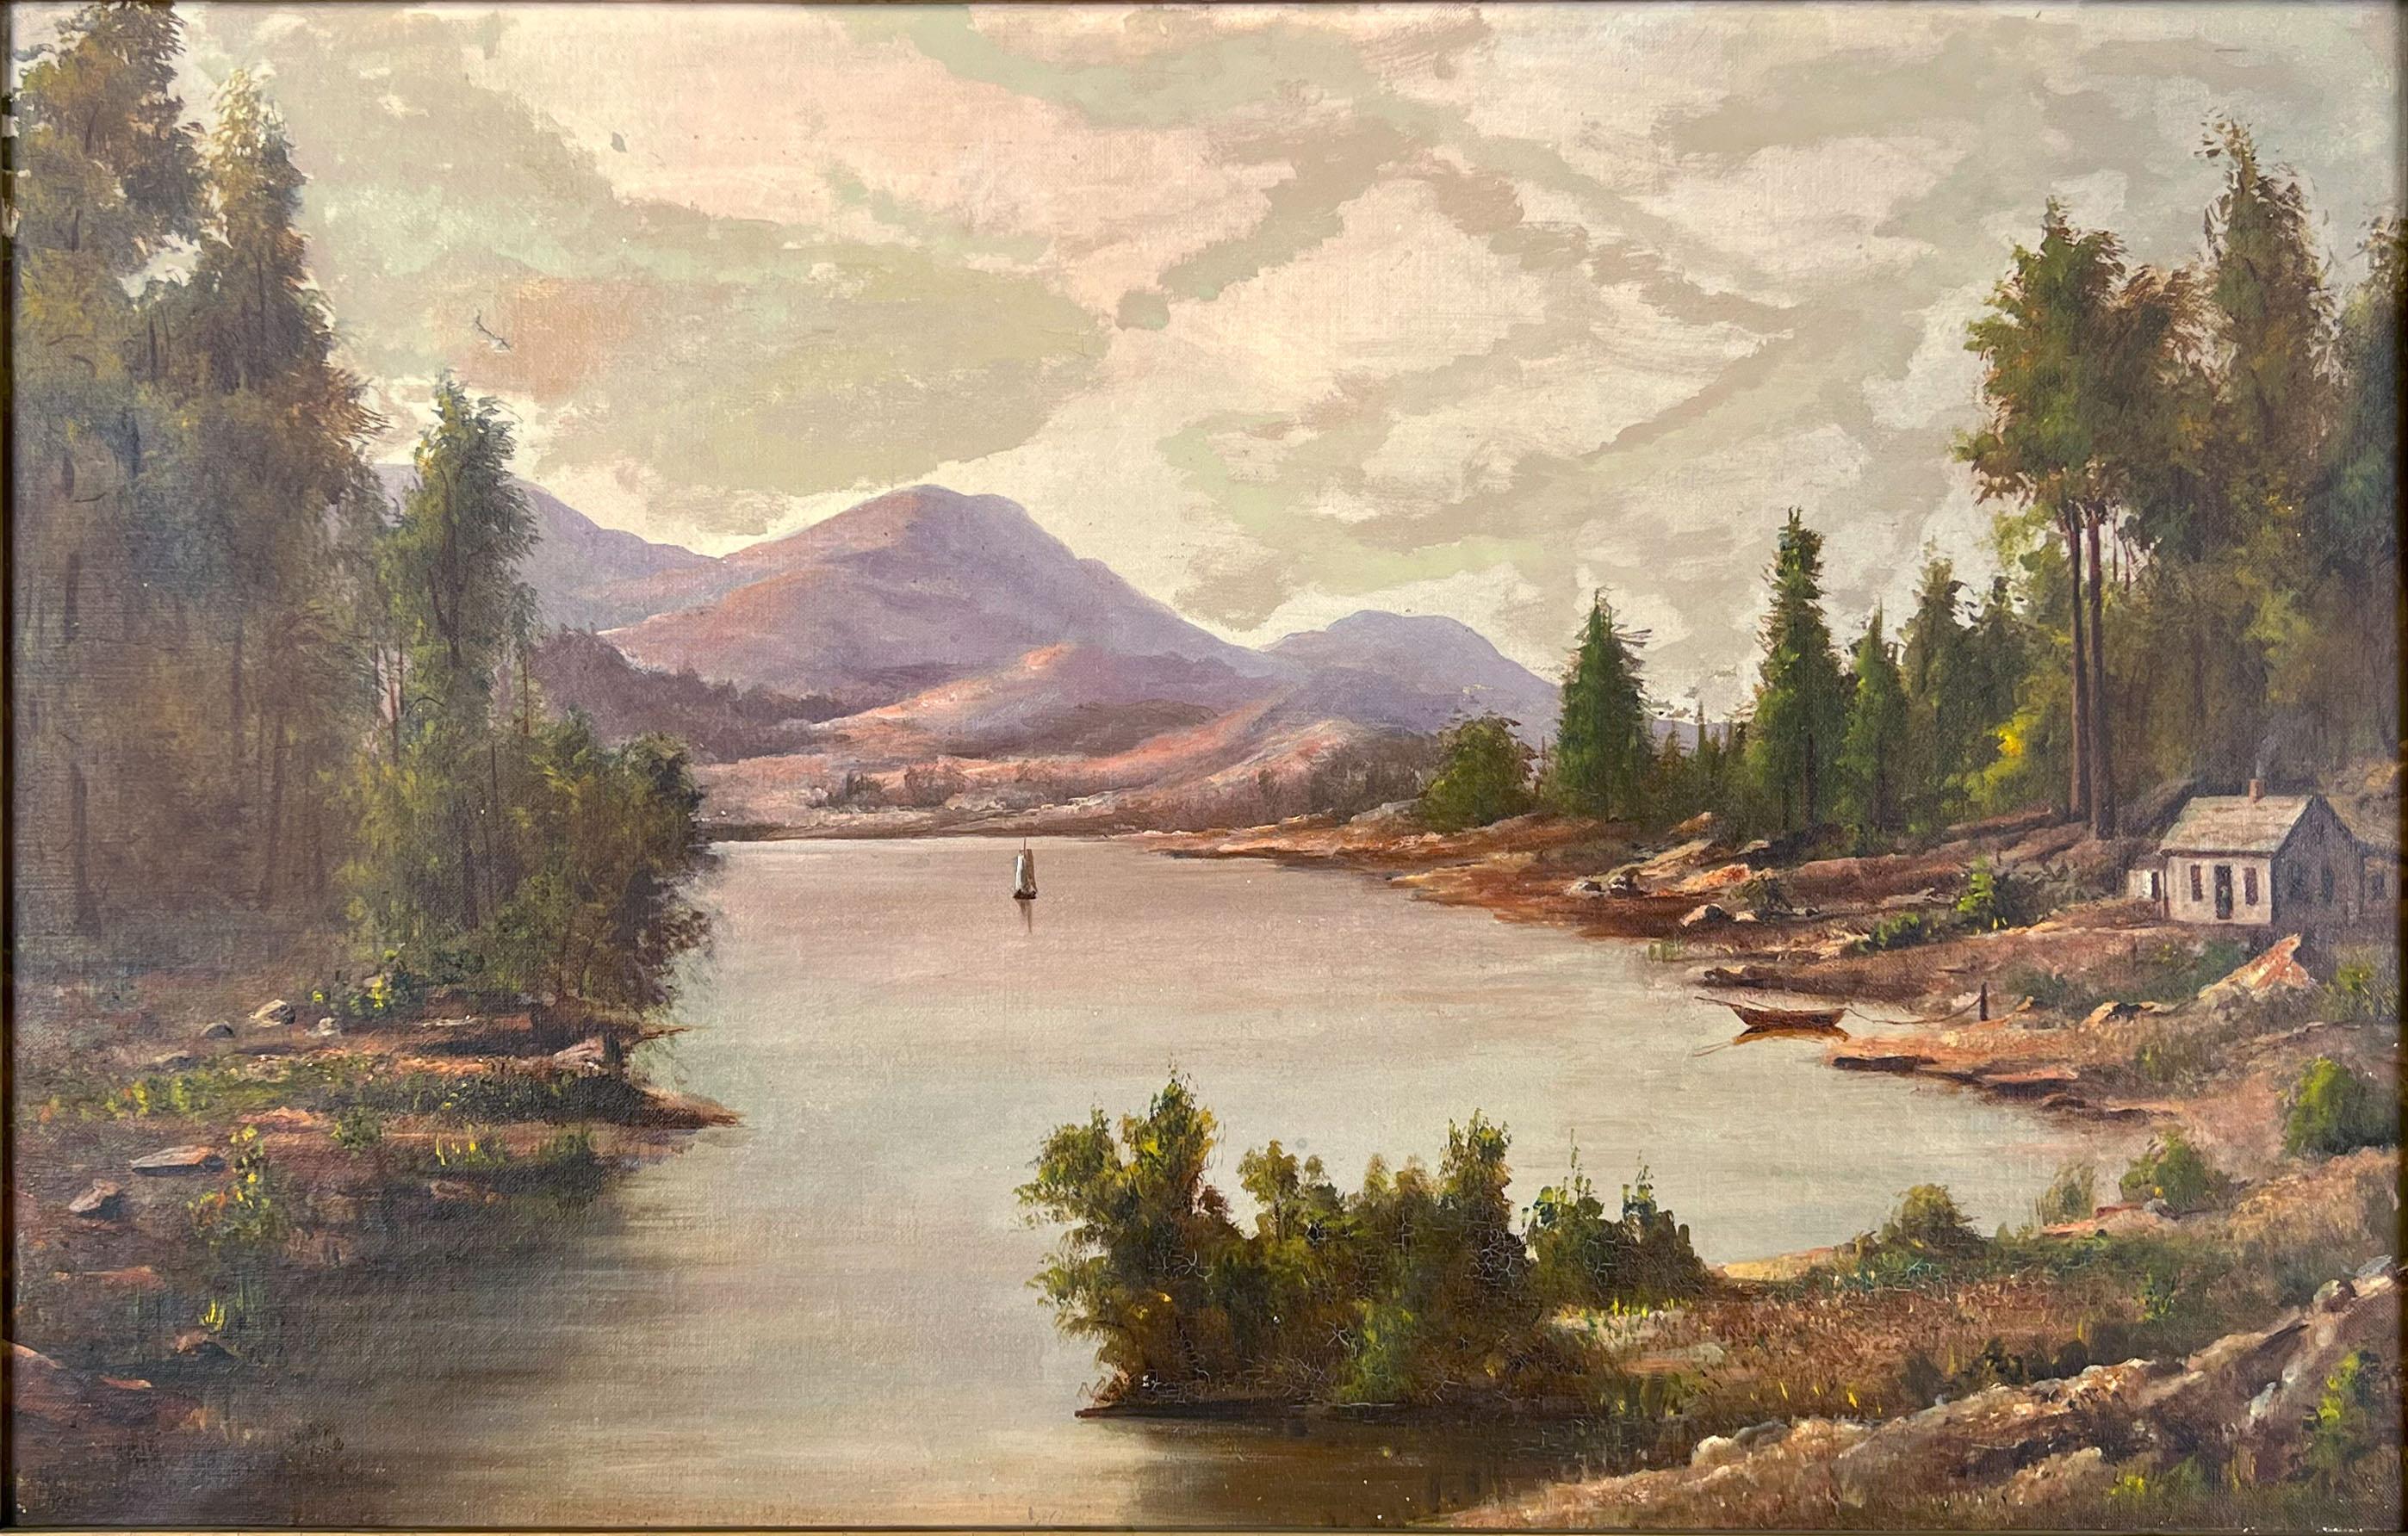 Hudson River School circa 1890s Original Oil Painting

A classic Hudson River School style painting of the Hudson River area lake. Spring clouds move over a mountain lake with rolling hills in background. A sailboat meandering on calm cool water and